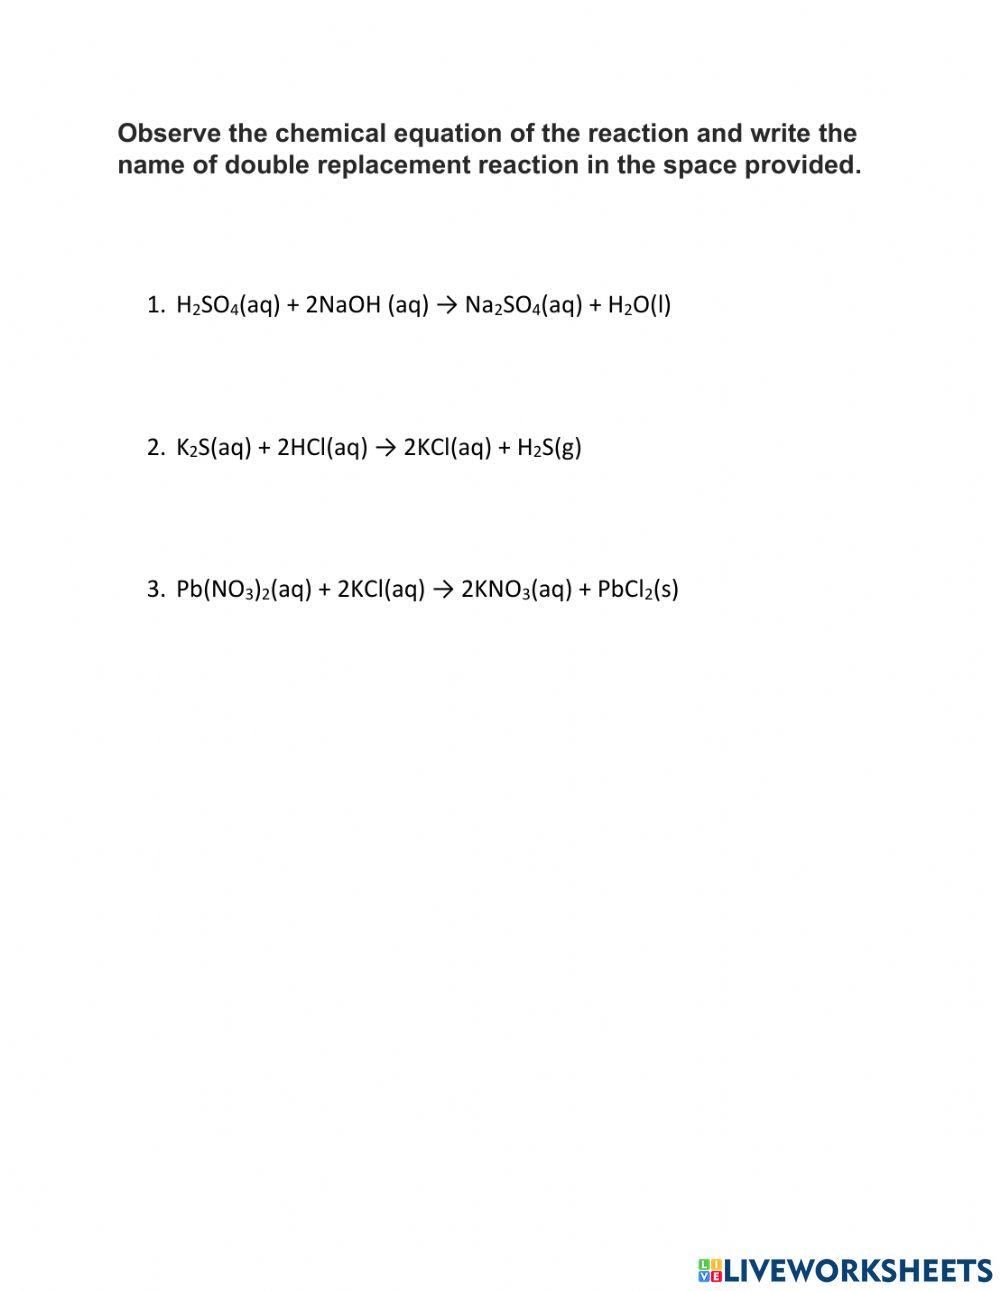 Types of double replacement reaction in aqueous solution